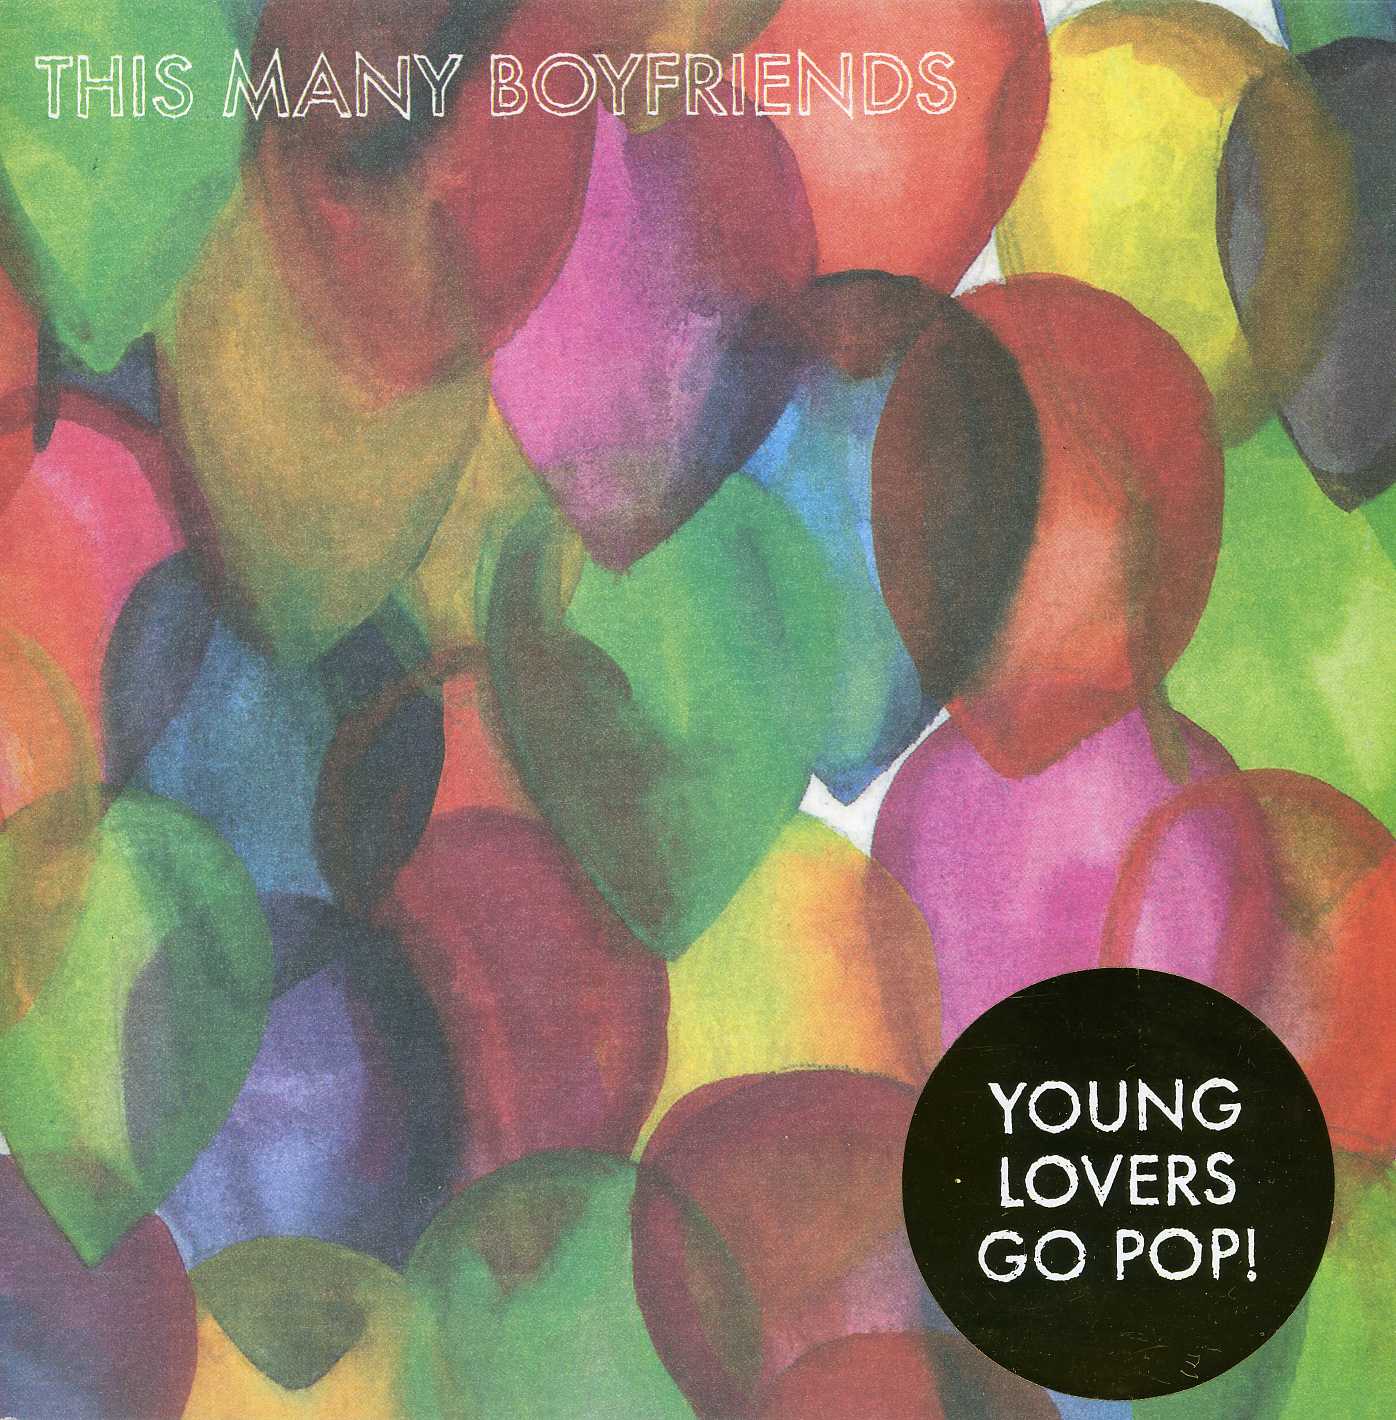 YOUNG LOVERS GO POP